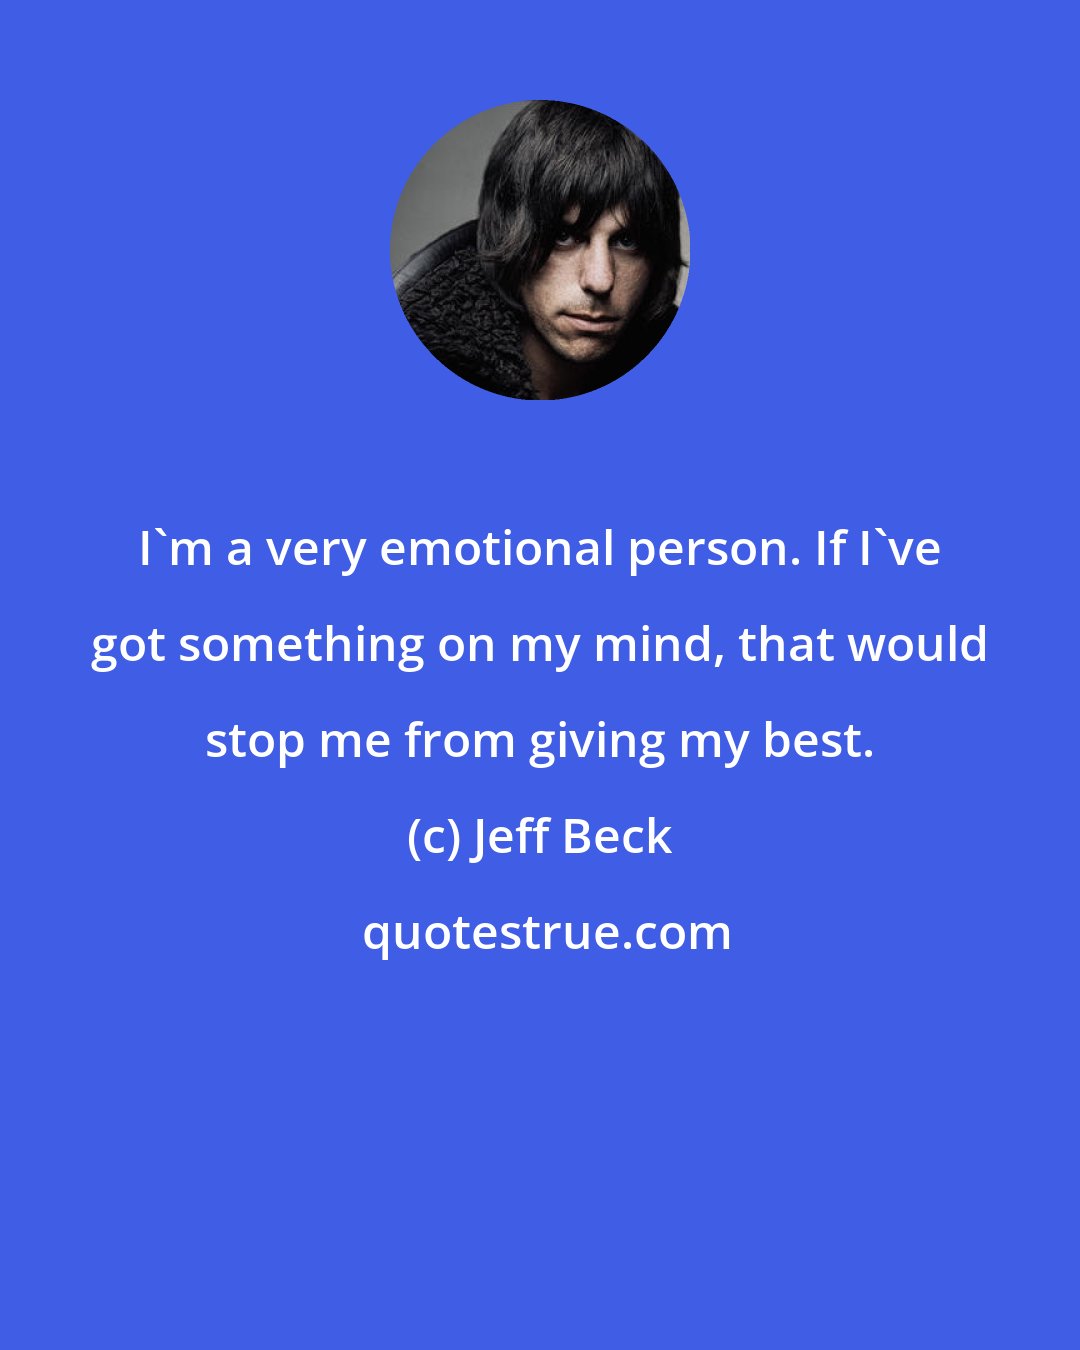 Jeff Beck: I'm a very emotional person. If I've got something on my mind, that would stop me from giving my best.